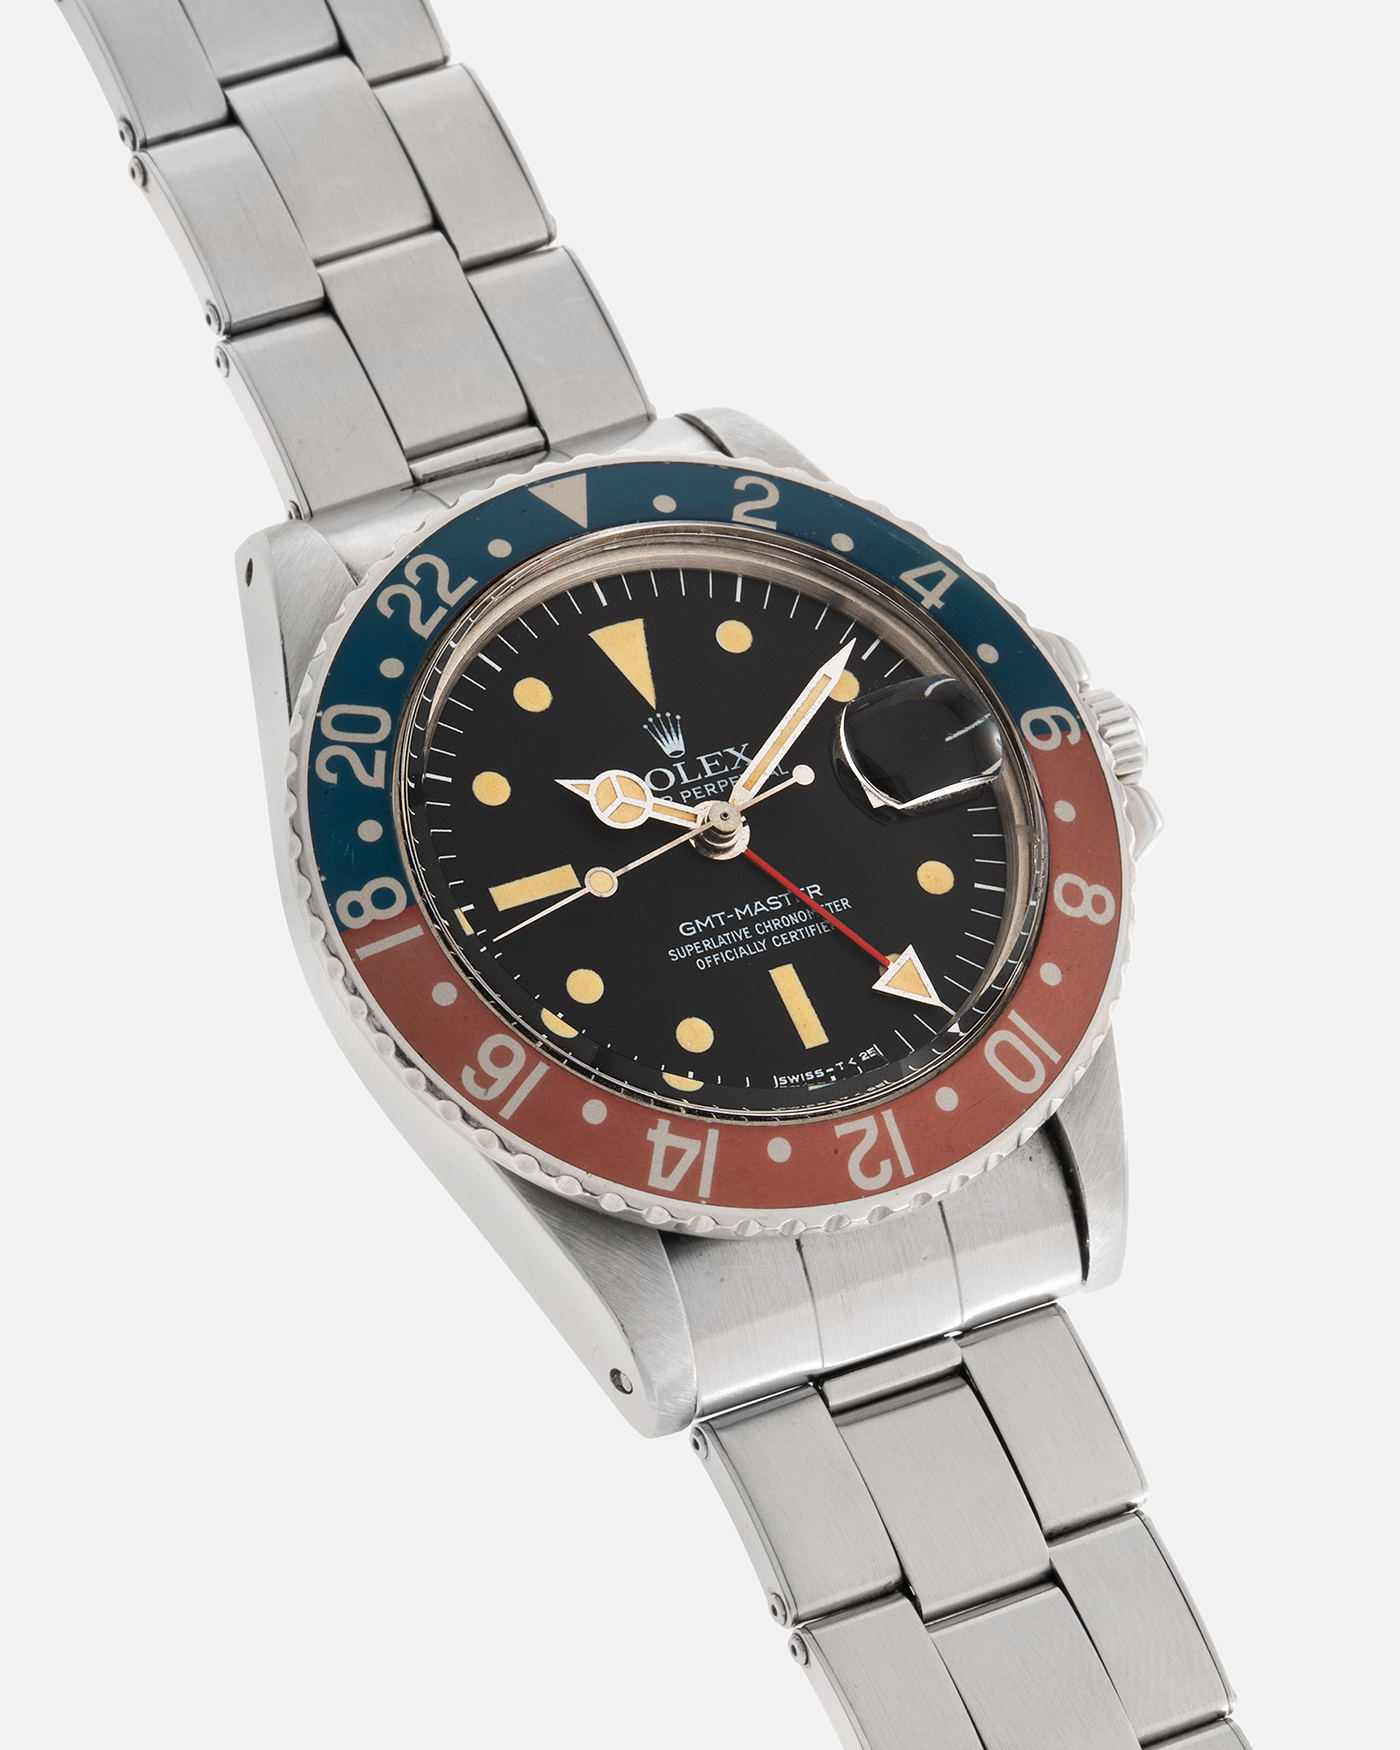 Brand: Rolex Year: 1976 Model: GMT-Master Reference Number: 1675 Serial Number: 420XXXX Material: Stainless Steel Movement: Rolex Cal. 1575, Self-Winding Case Diameter: 40mm Lug Width: 20mm Bracelet: Rolex Stainless Steel Folded Oyster Bracelet with Signed Deployant Clasp